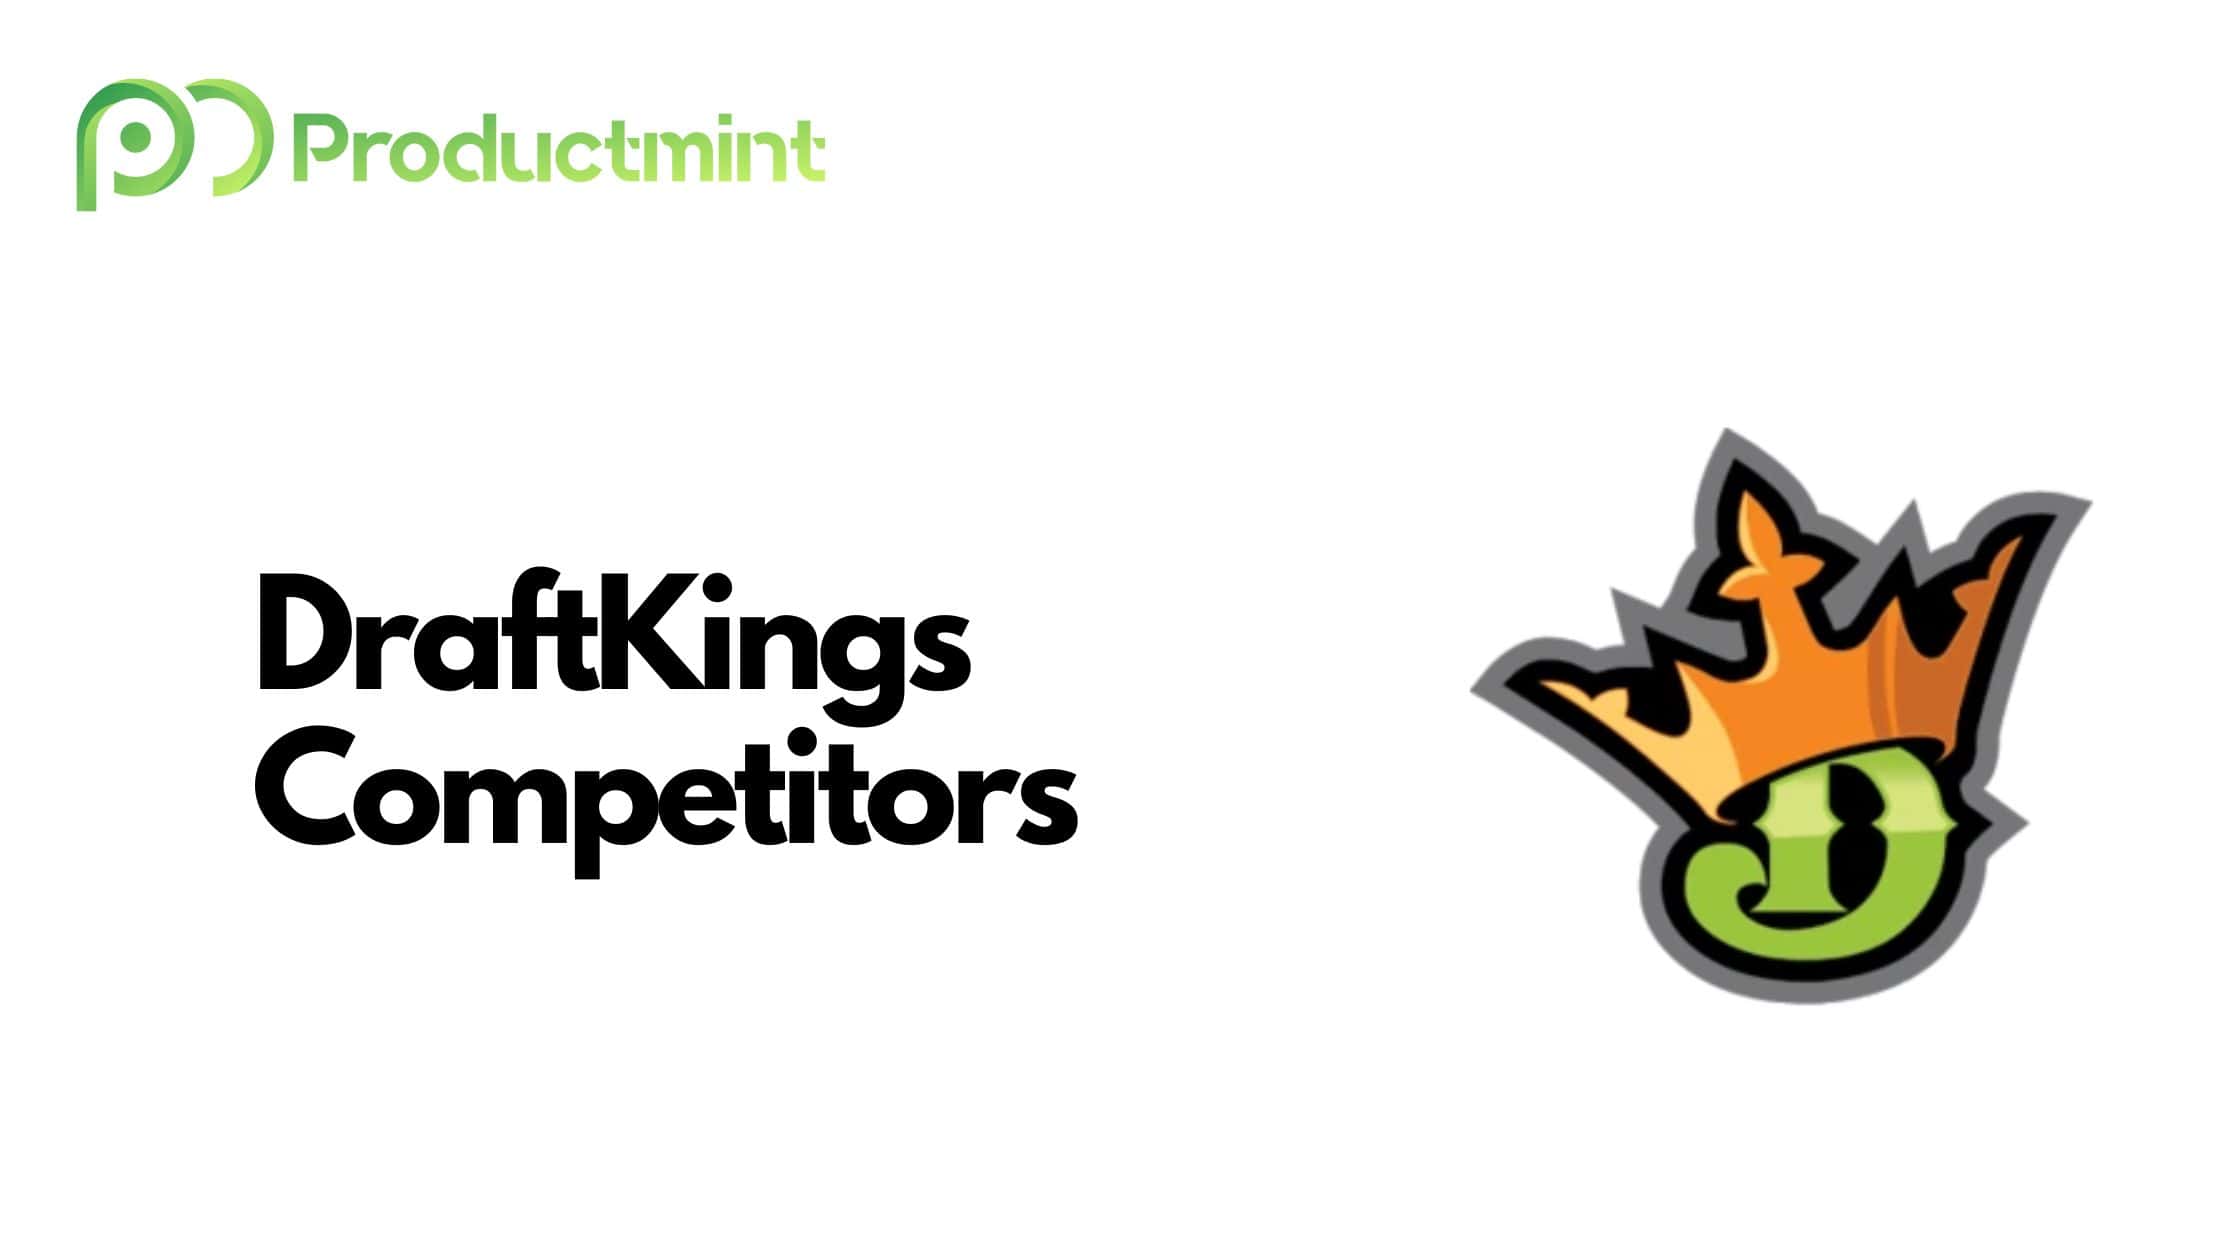 DraftKings Competitors